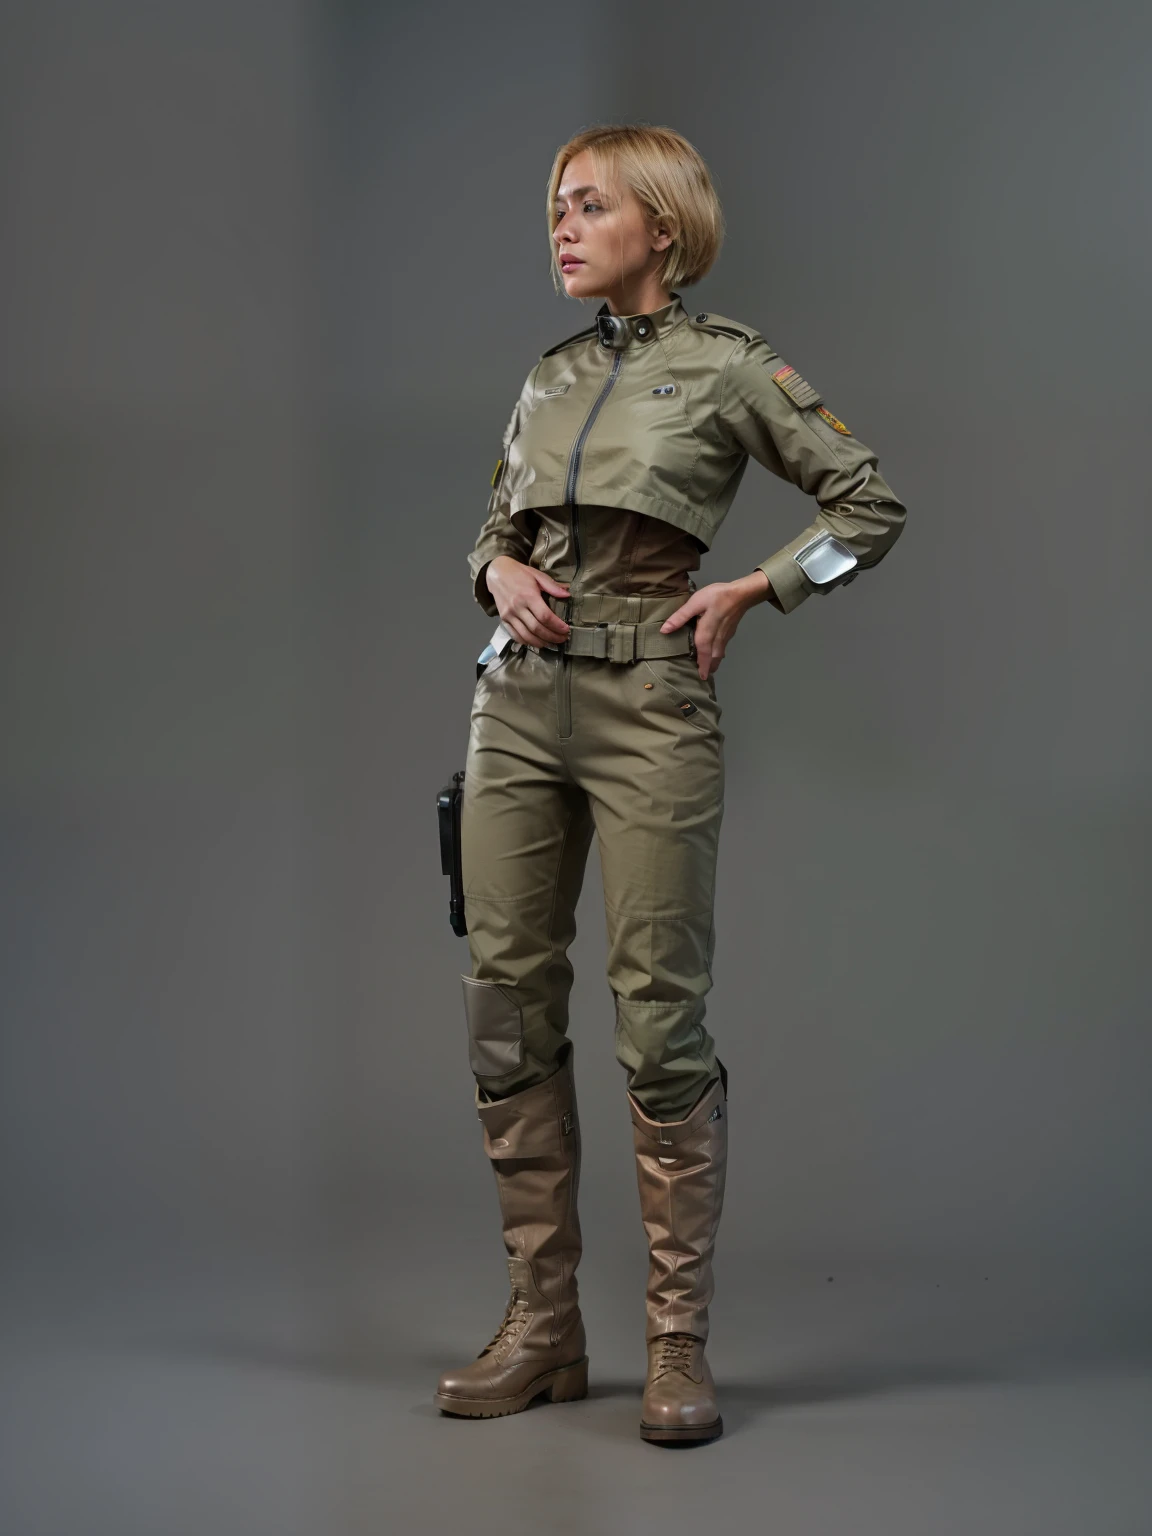 a close up of a blond officer in a suit and boots, female lead character, sci fi female character, sci-fi female, short hair female character, sci - fi character, scifi character, dystopian scifi outfit, full body shot hyperdetailed, dystopian sci-fi character, scifi blond woman, futuristic starship crew member, clothed in sci-fi military armor, scifi character render, engineer, officer